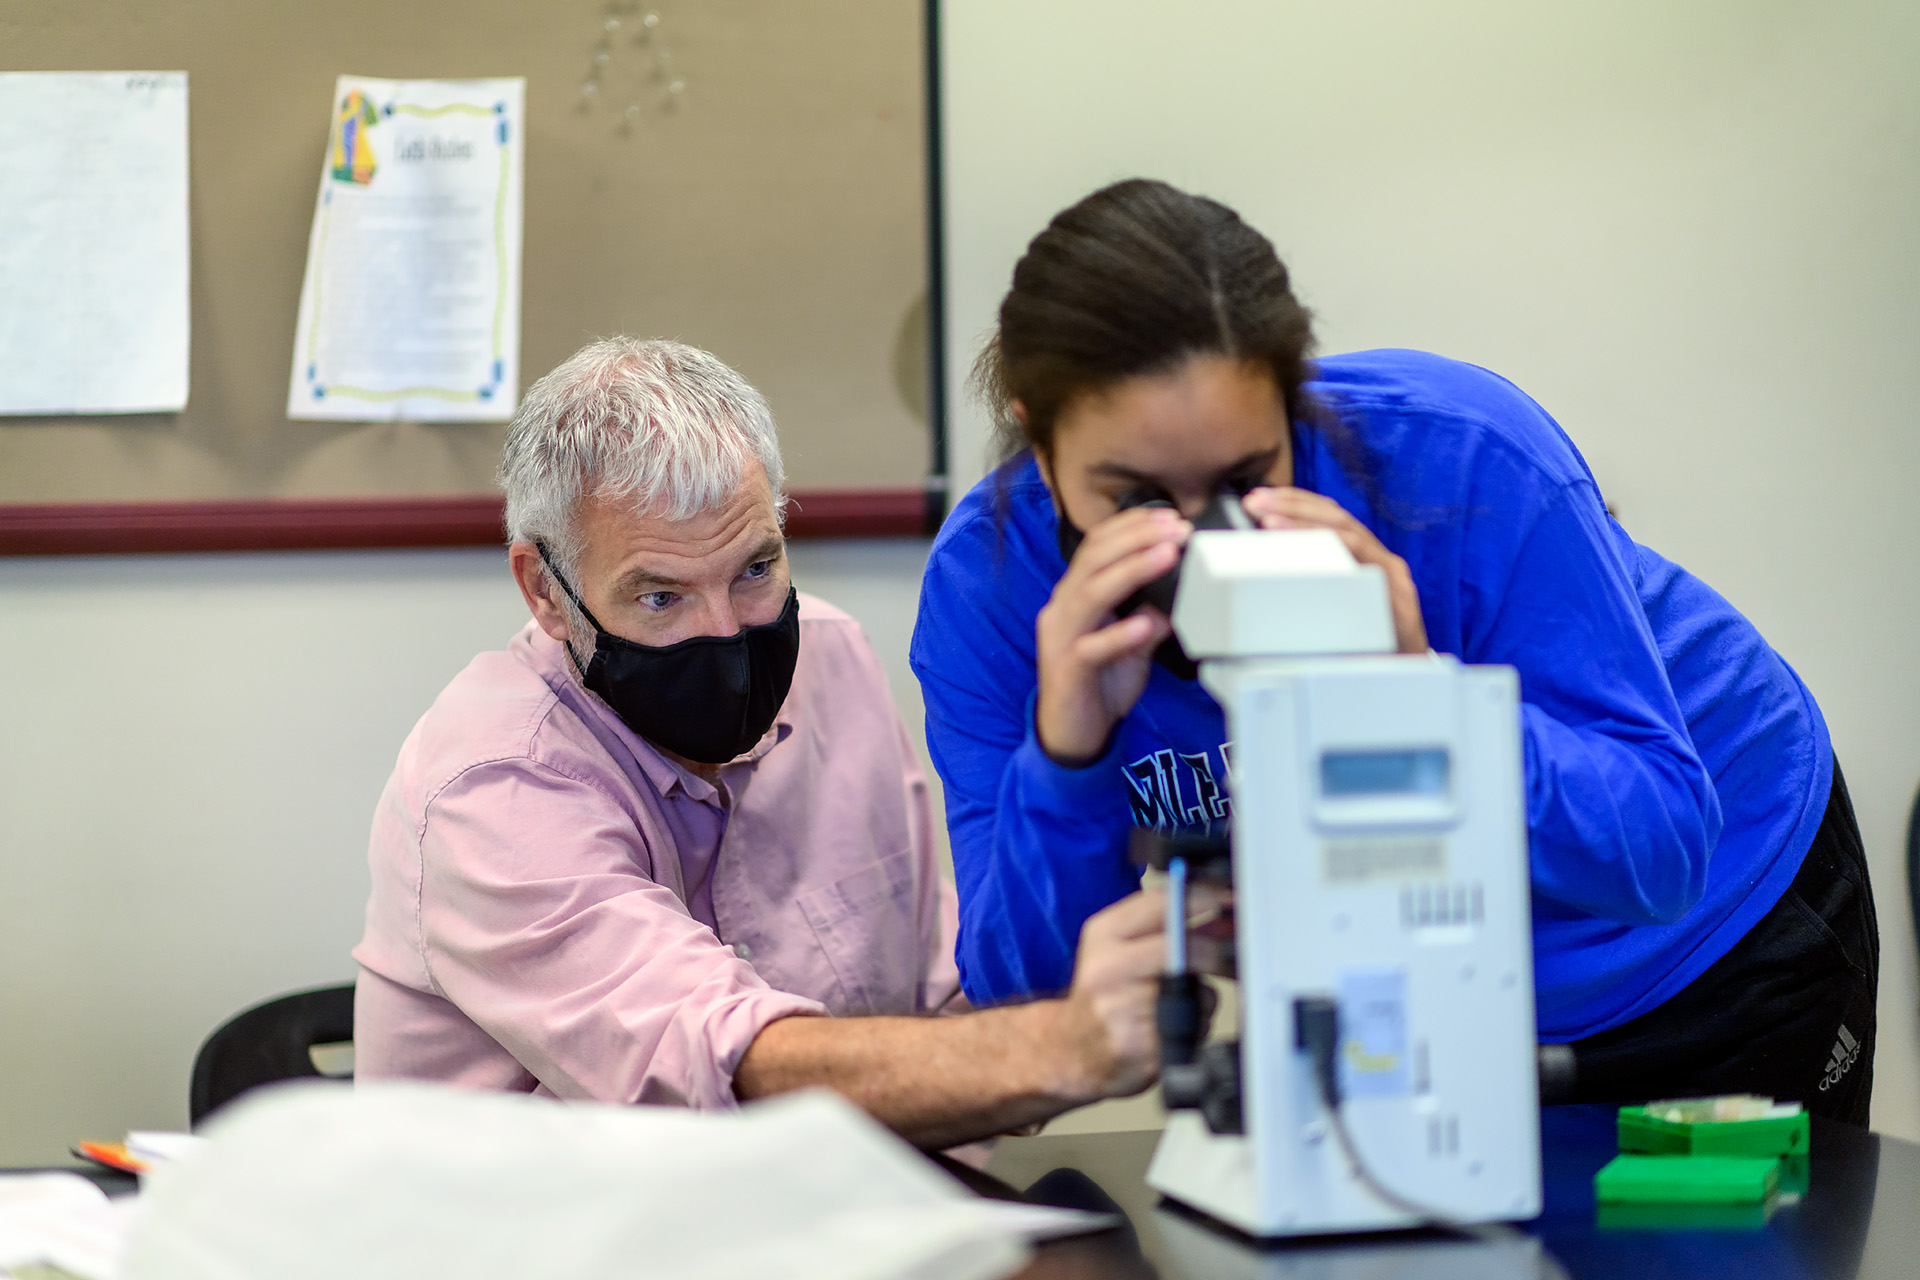 Dennis Mullen, Honors Biology faculty portrait in the Honors Science Lab with student Danielle Taitt.